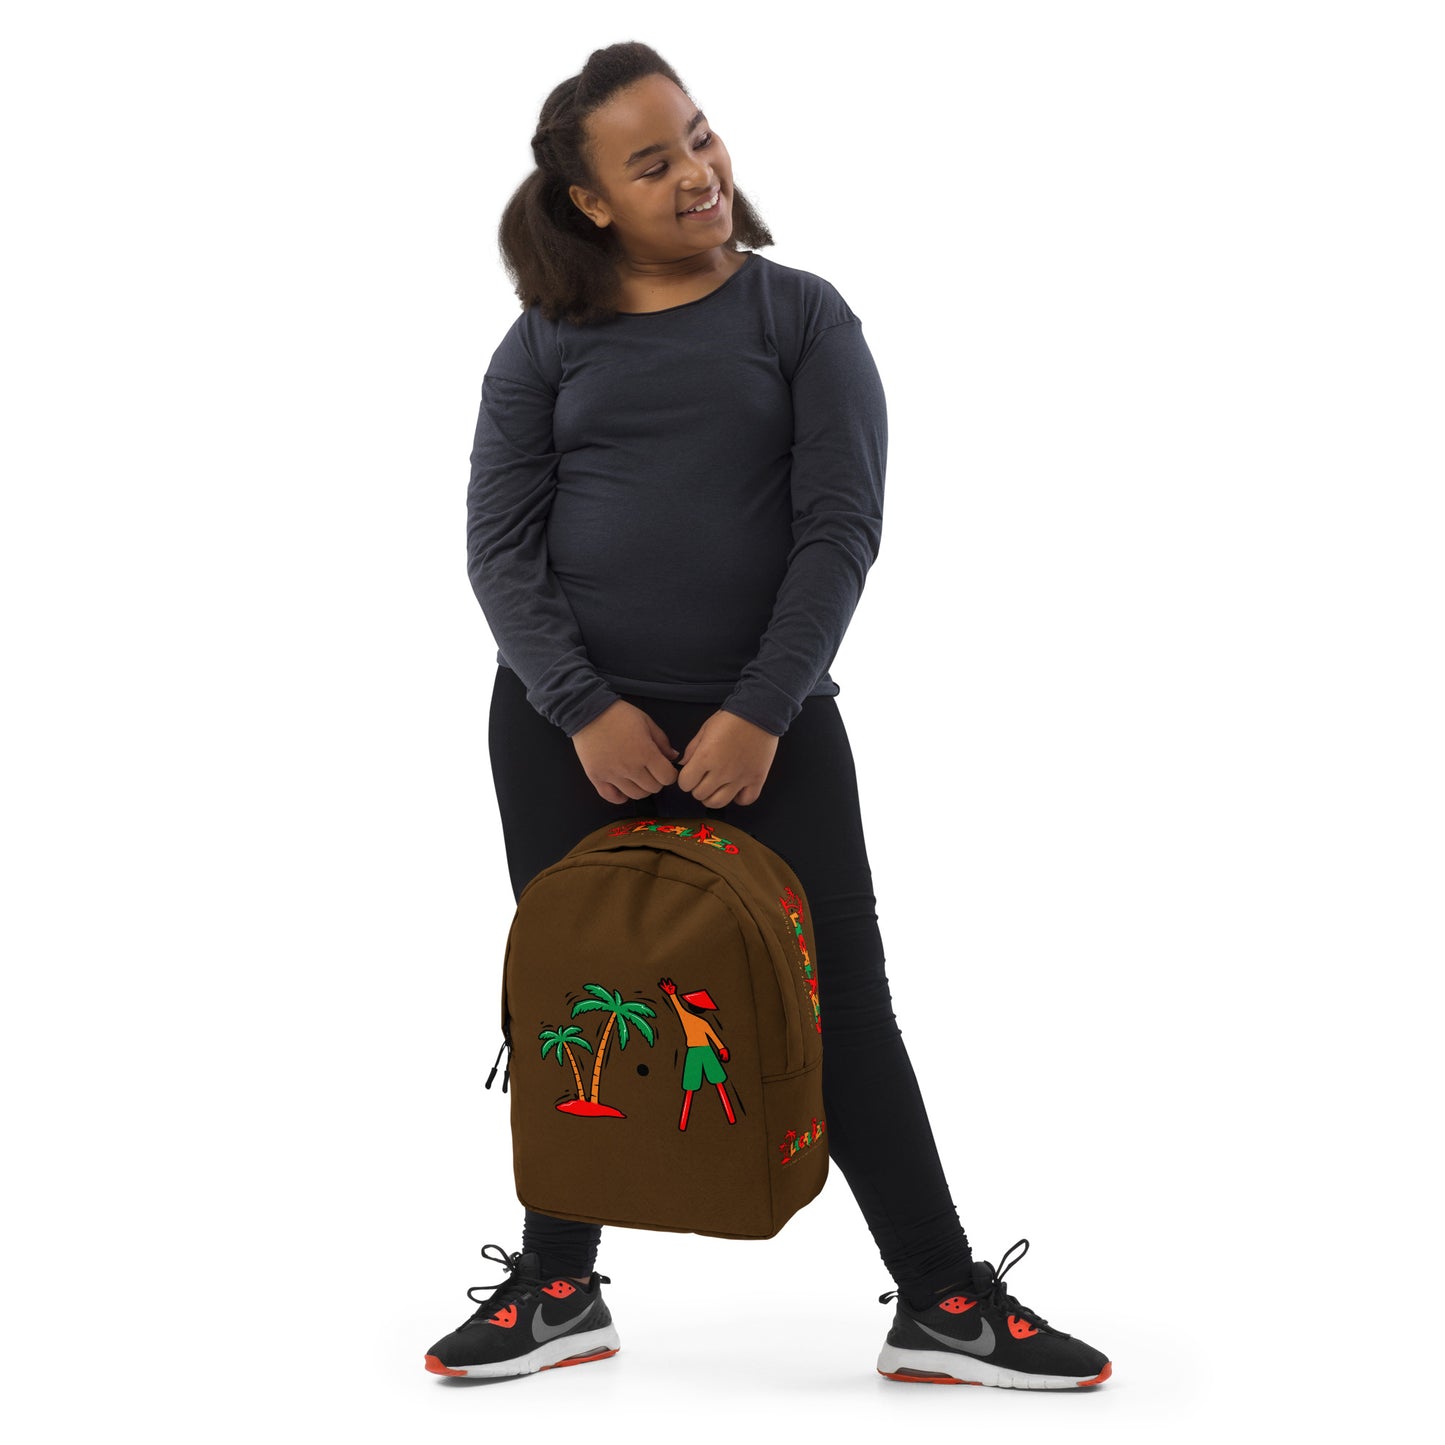 Brown V.Localized (Ice/Gold/Green) Minimalist Backpack